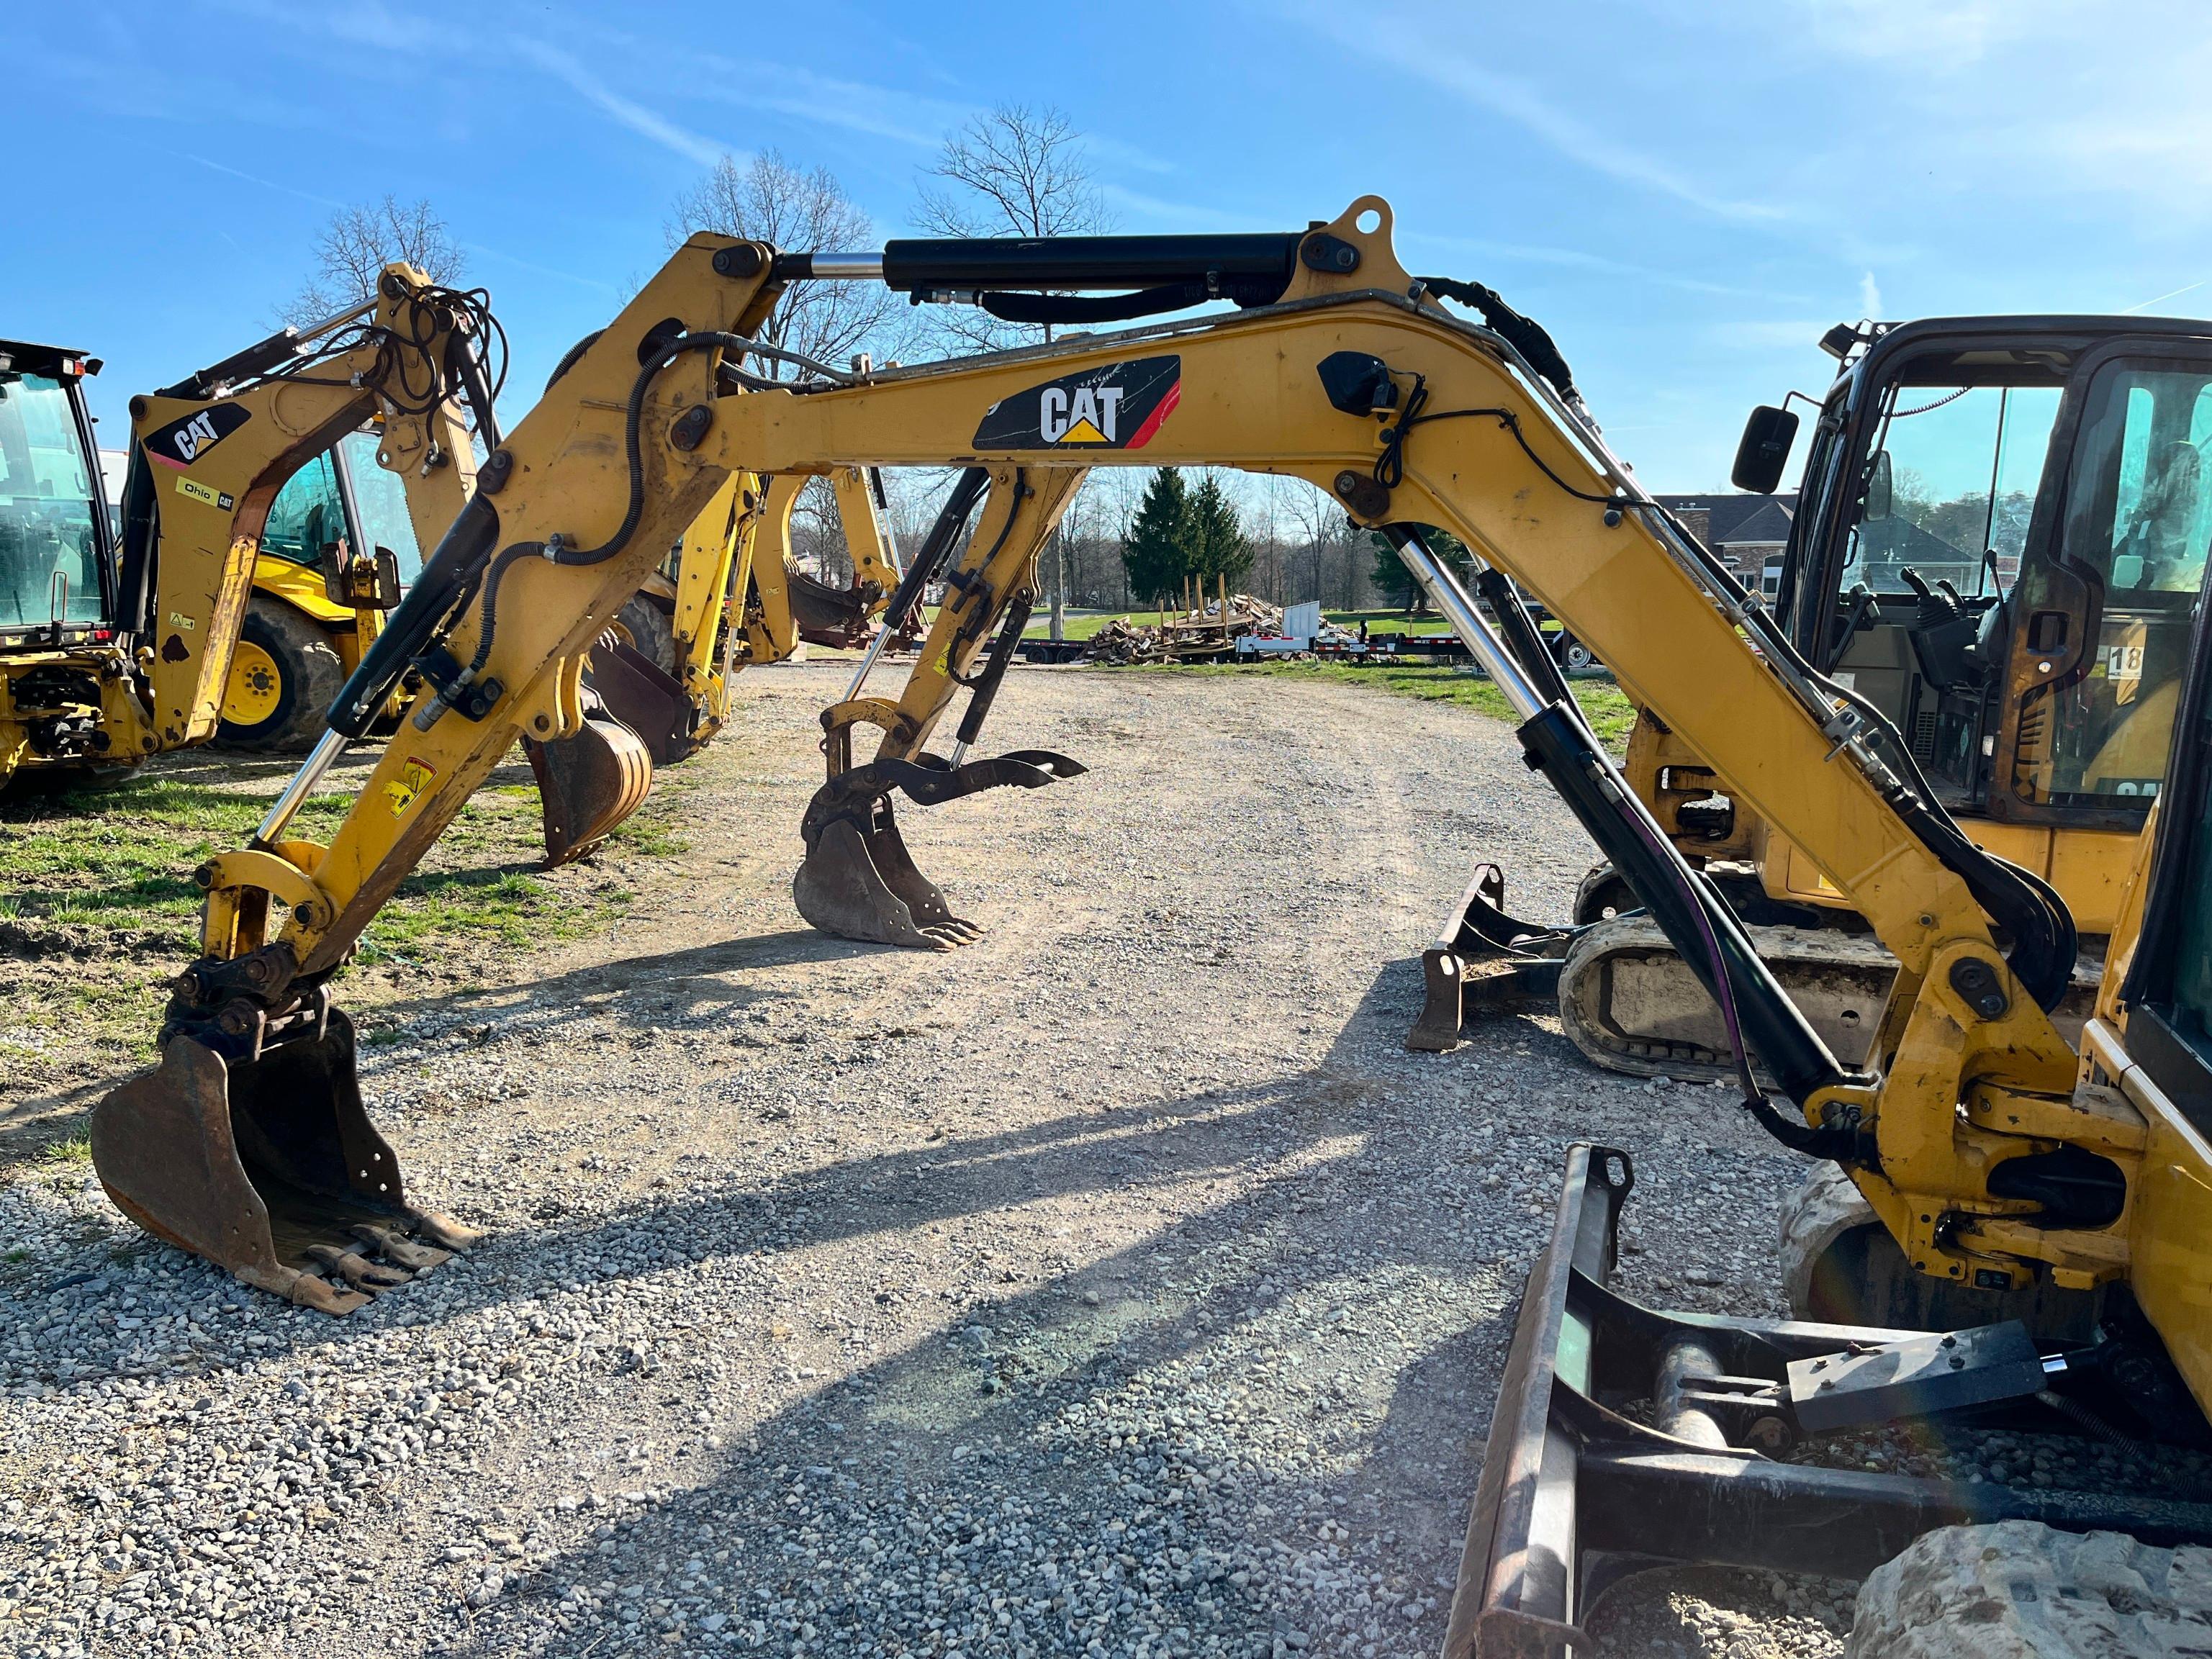 2020 CAT 304E2CR HYDRAULIC EXCAVATOR SN:AME407022 powered by Cat C2.4 diesel engine, equipped with